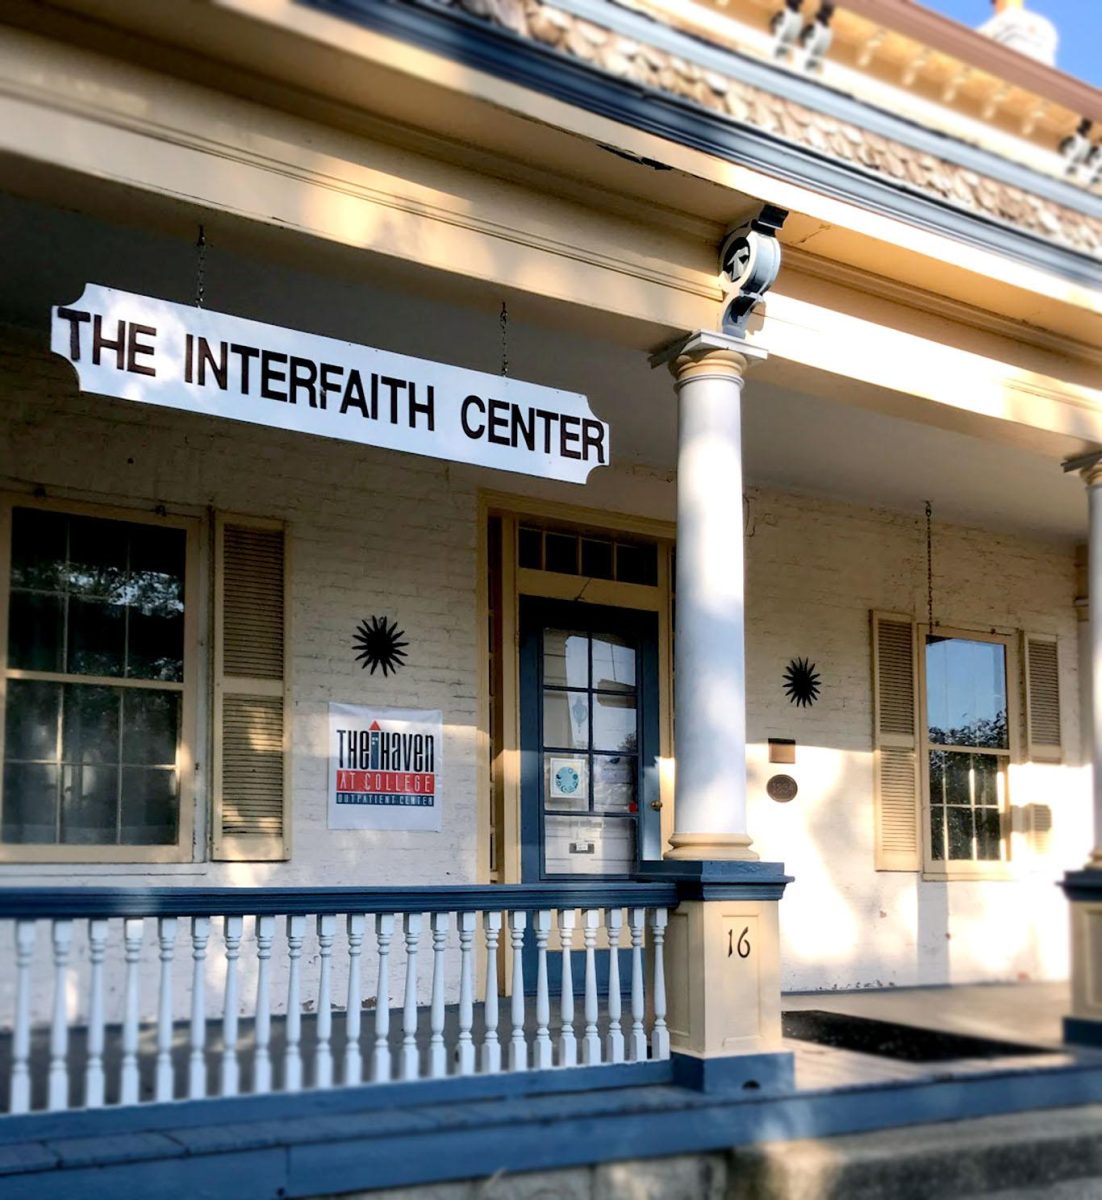 A Haven outpatient center is located in the Interfaith Center, 16 S. Campus Ave., in Oxford. This serves as a safe space for students to meet with their counselors and hang out in the common area. Photo by Lauren Shassere.